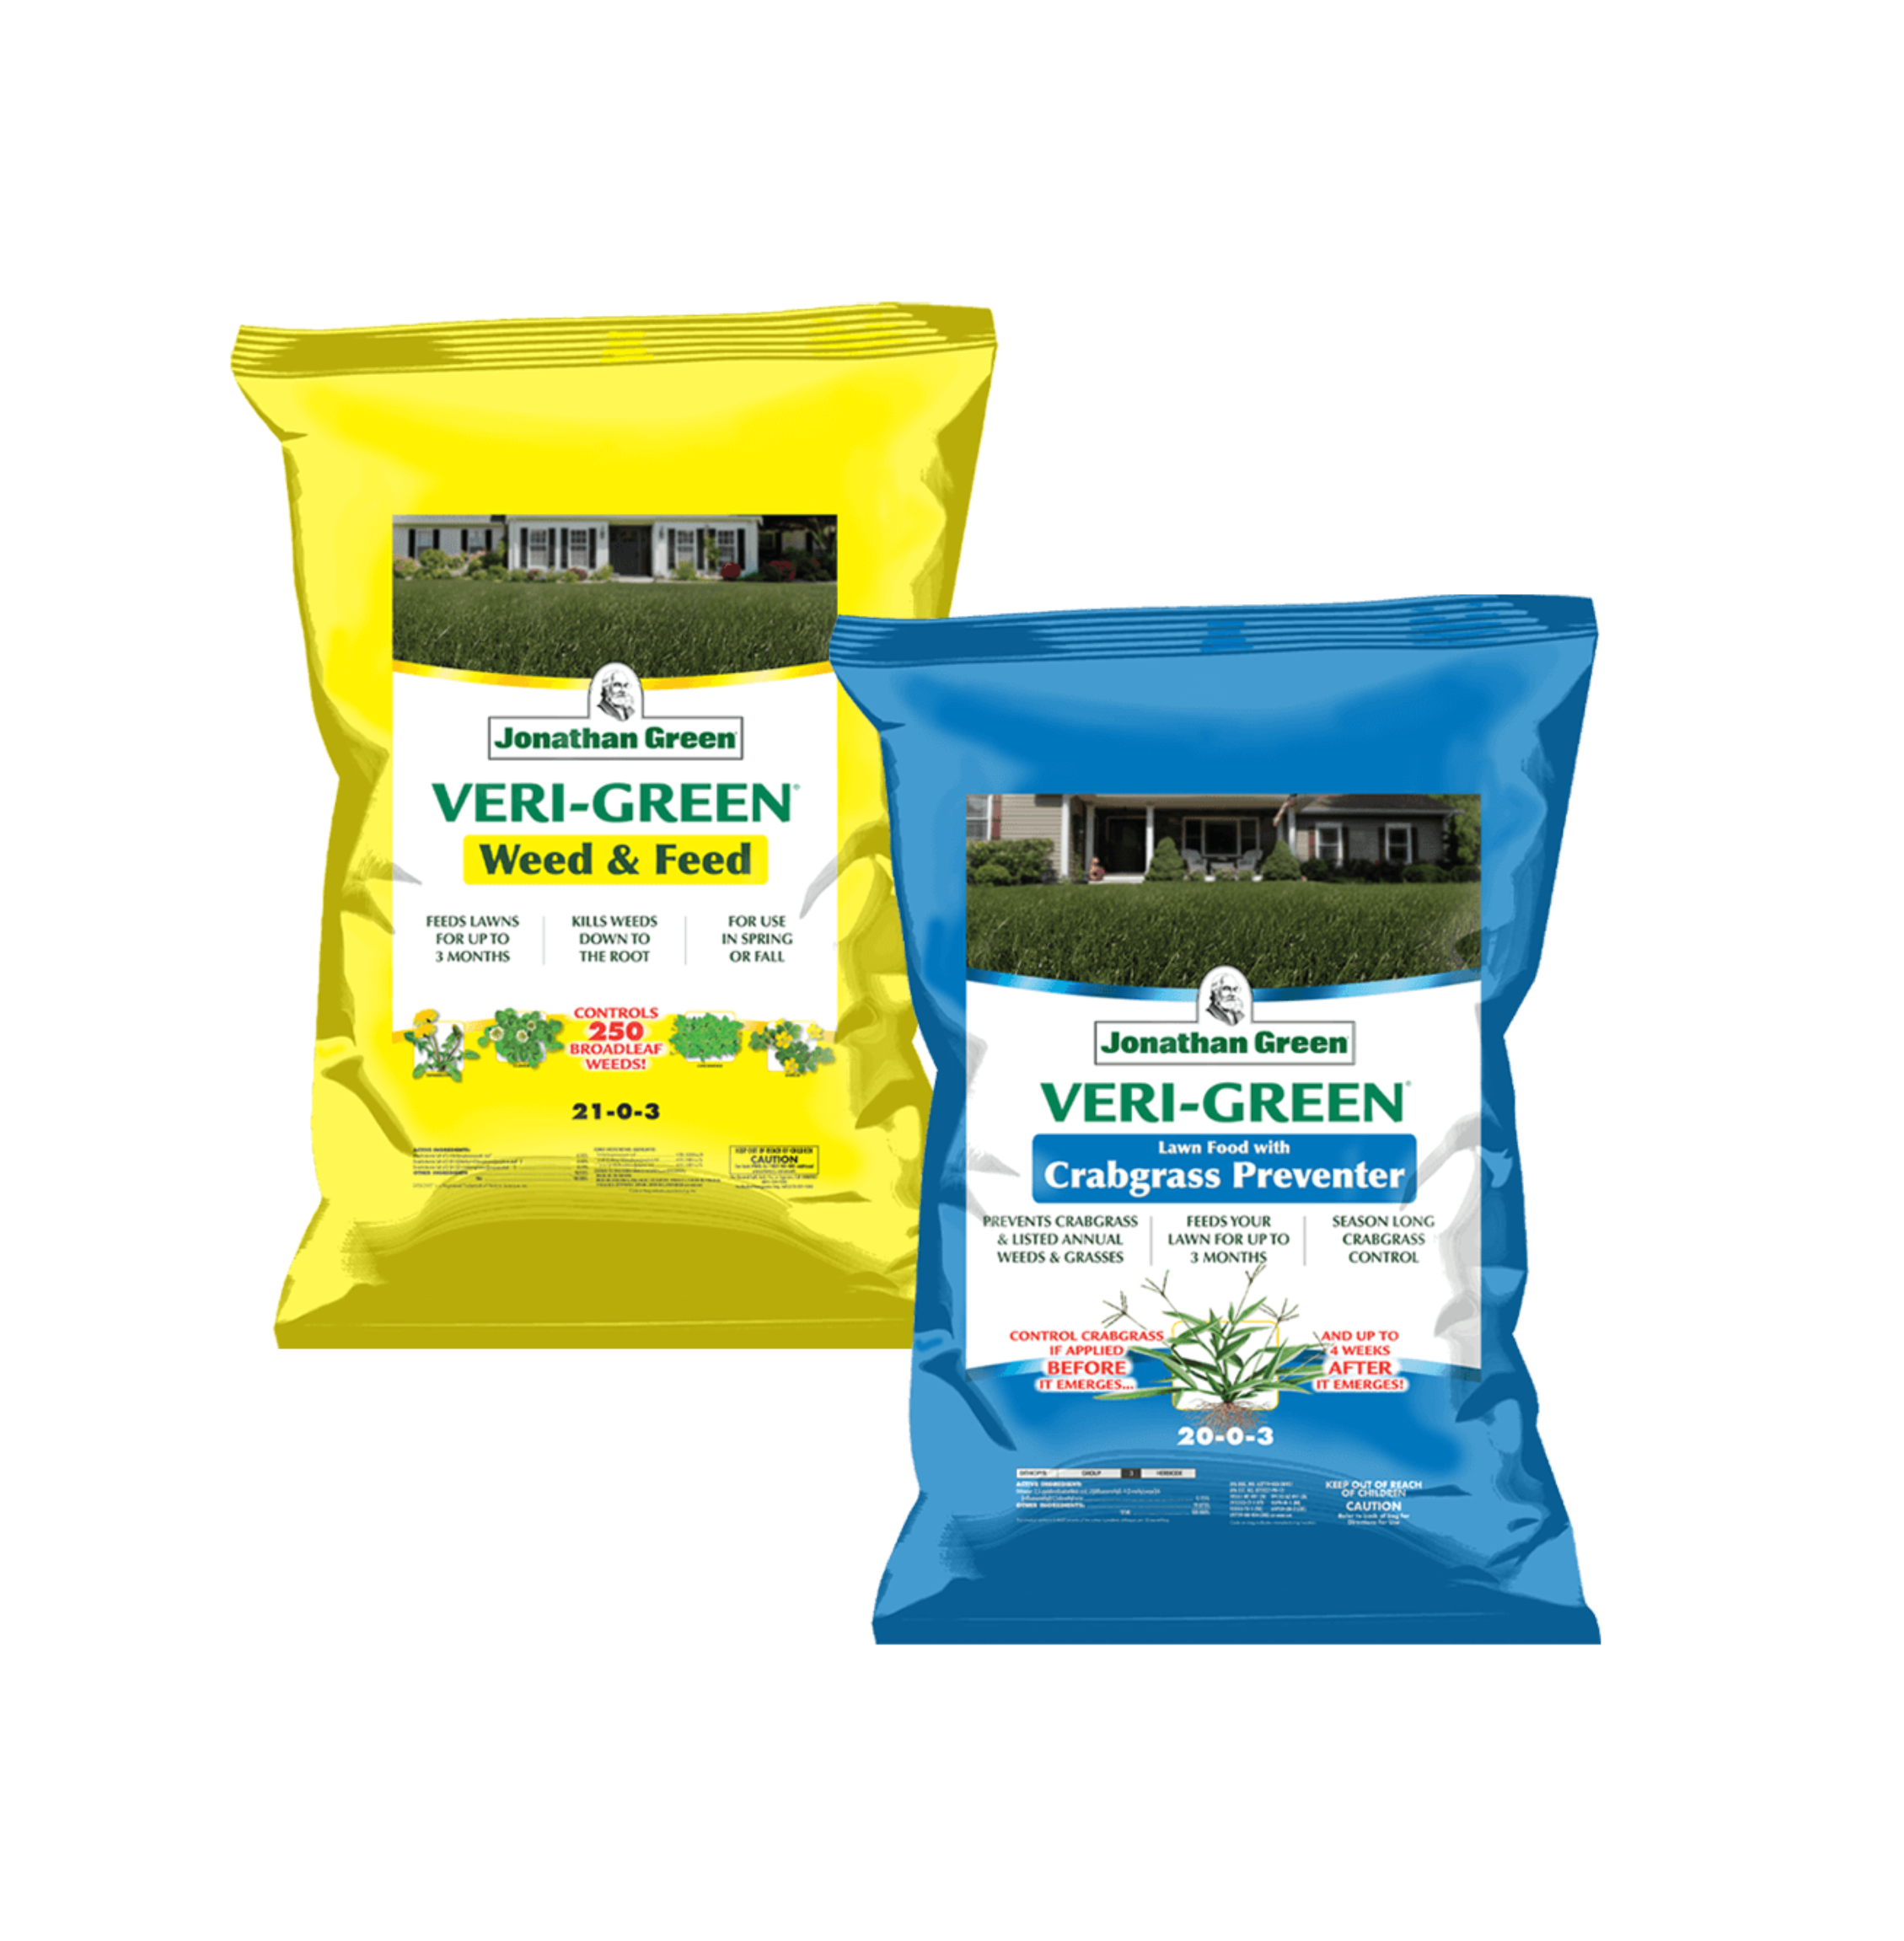 Jonathan Green Lawn Fertilizer and Weed Control Bundle - 5,000 sq ft